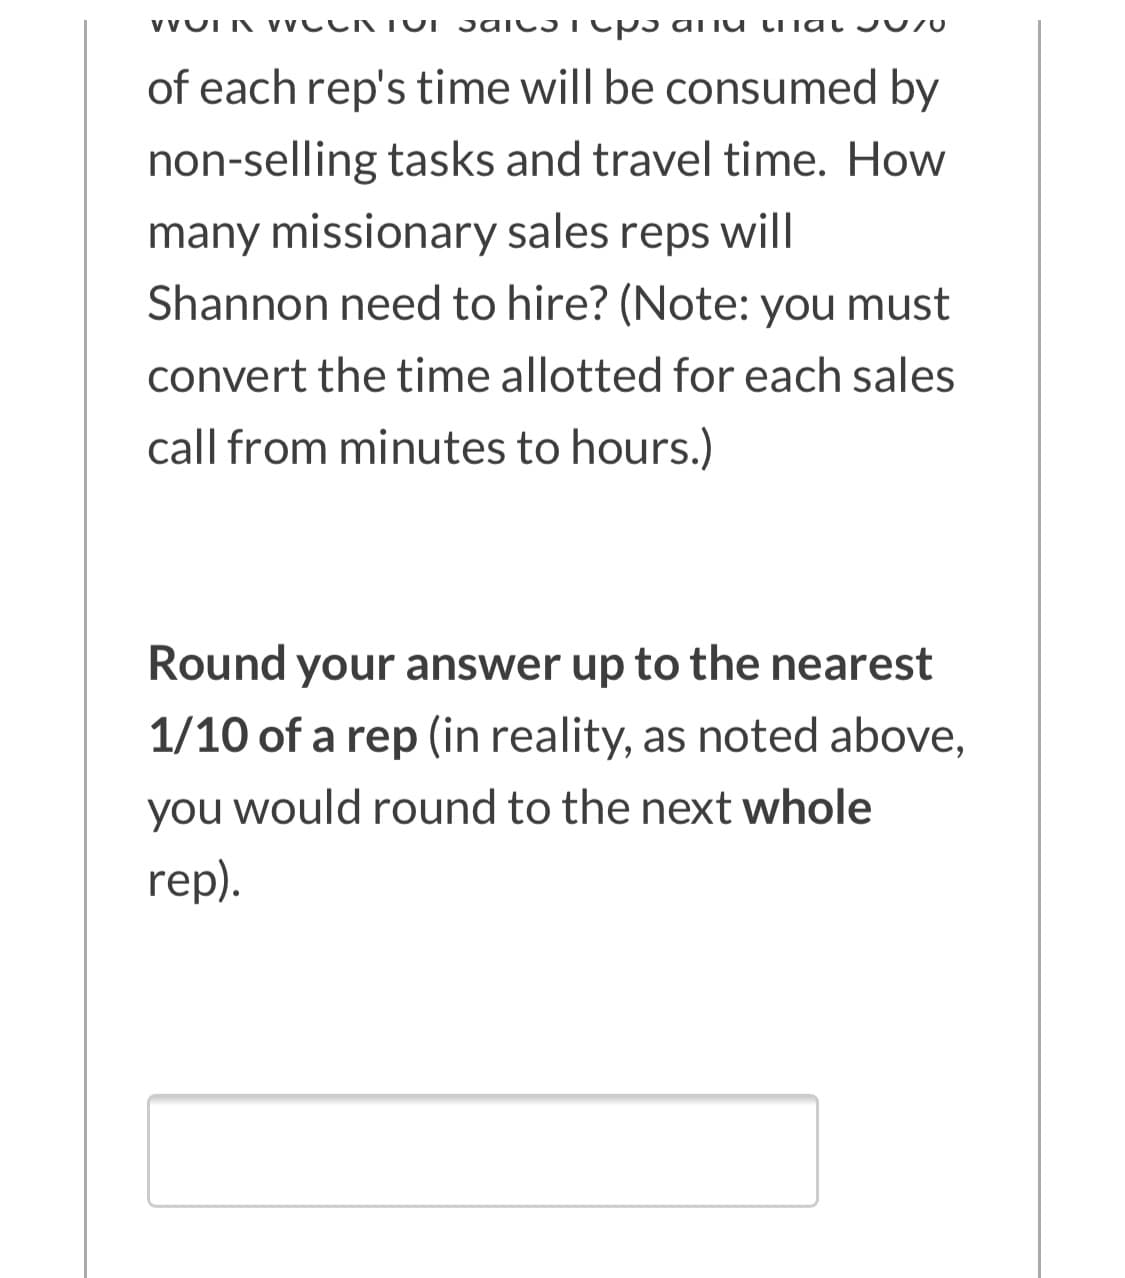 VVUI K VVCCK TUI Sai C5TCP 5 aiiu LITat J 070
of each rep's time will be consumed by
non-selling tasks and travel time. How
many missionary sales reps will
Shannon need to hire? (Note: you must
convert the time allotted for each sales
call from minutes to hours.)
Round your answer up to the nearest
1/10 of a rep (in reality, as noted above,
you would round to the next whole
rep).
